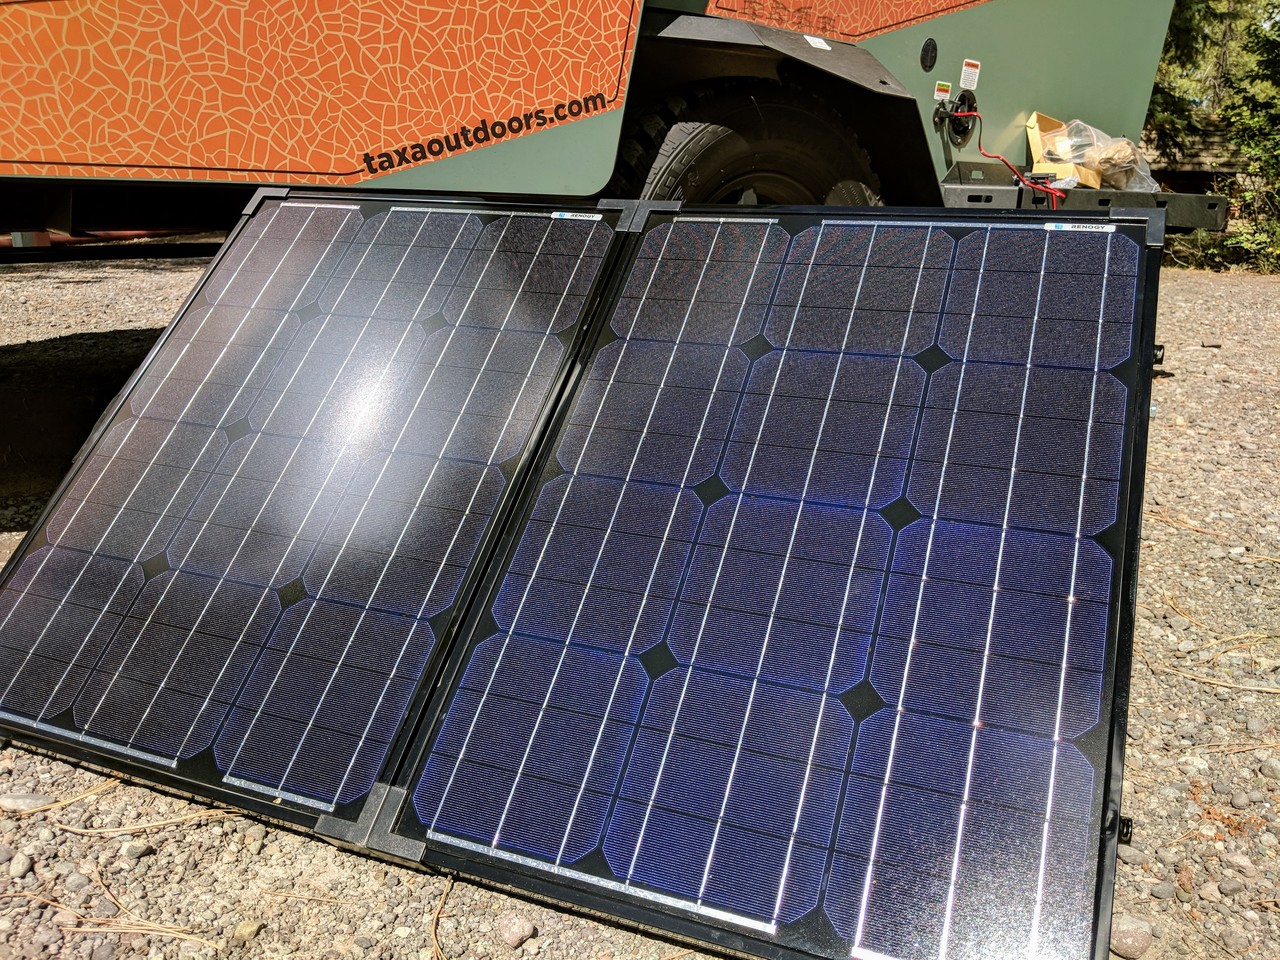 Solar suitcase for off grid camping